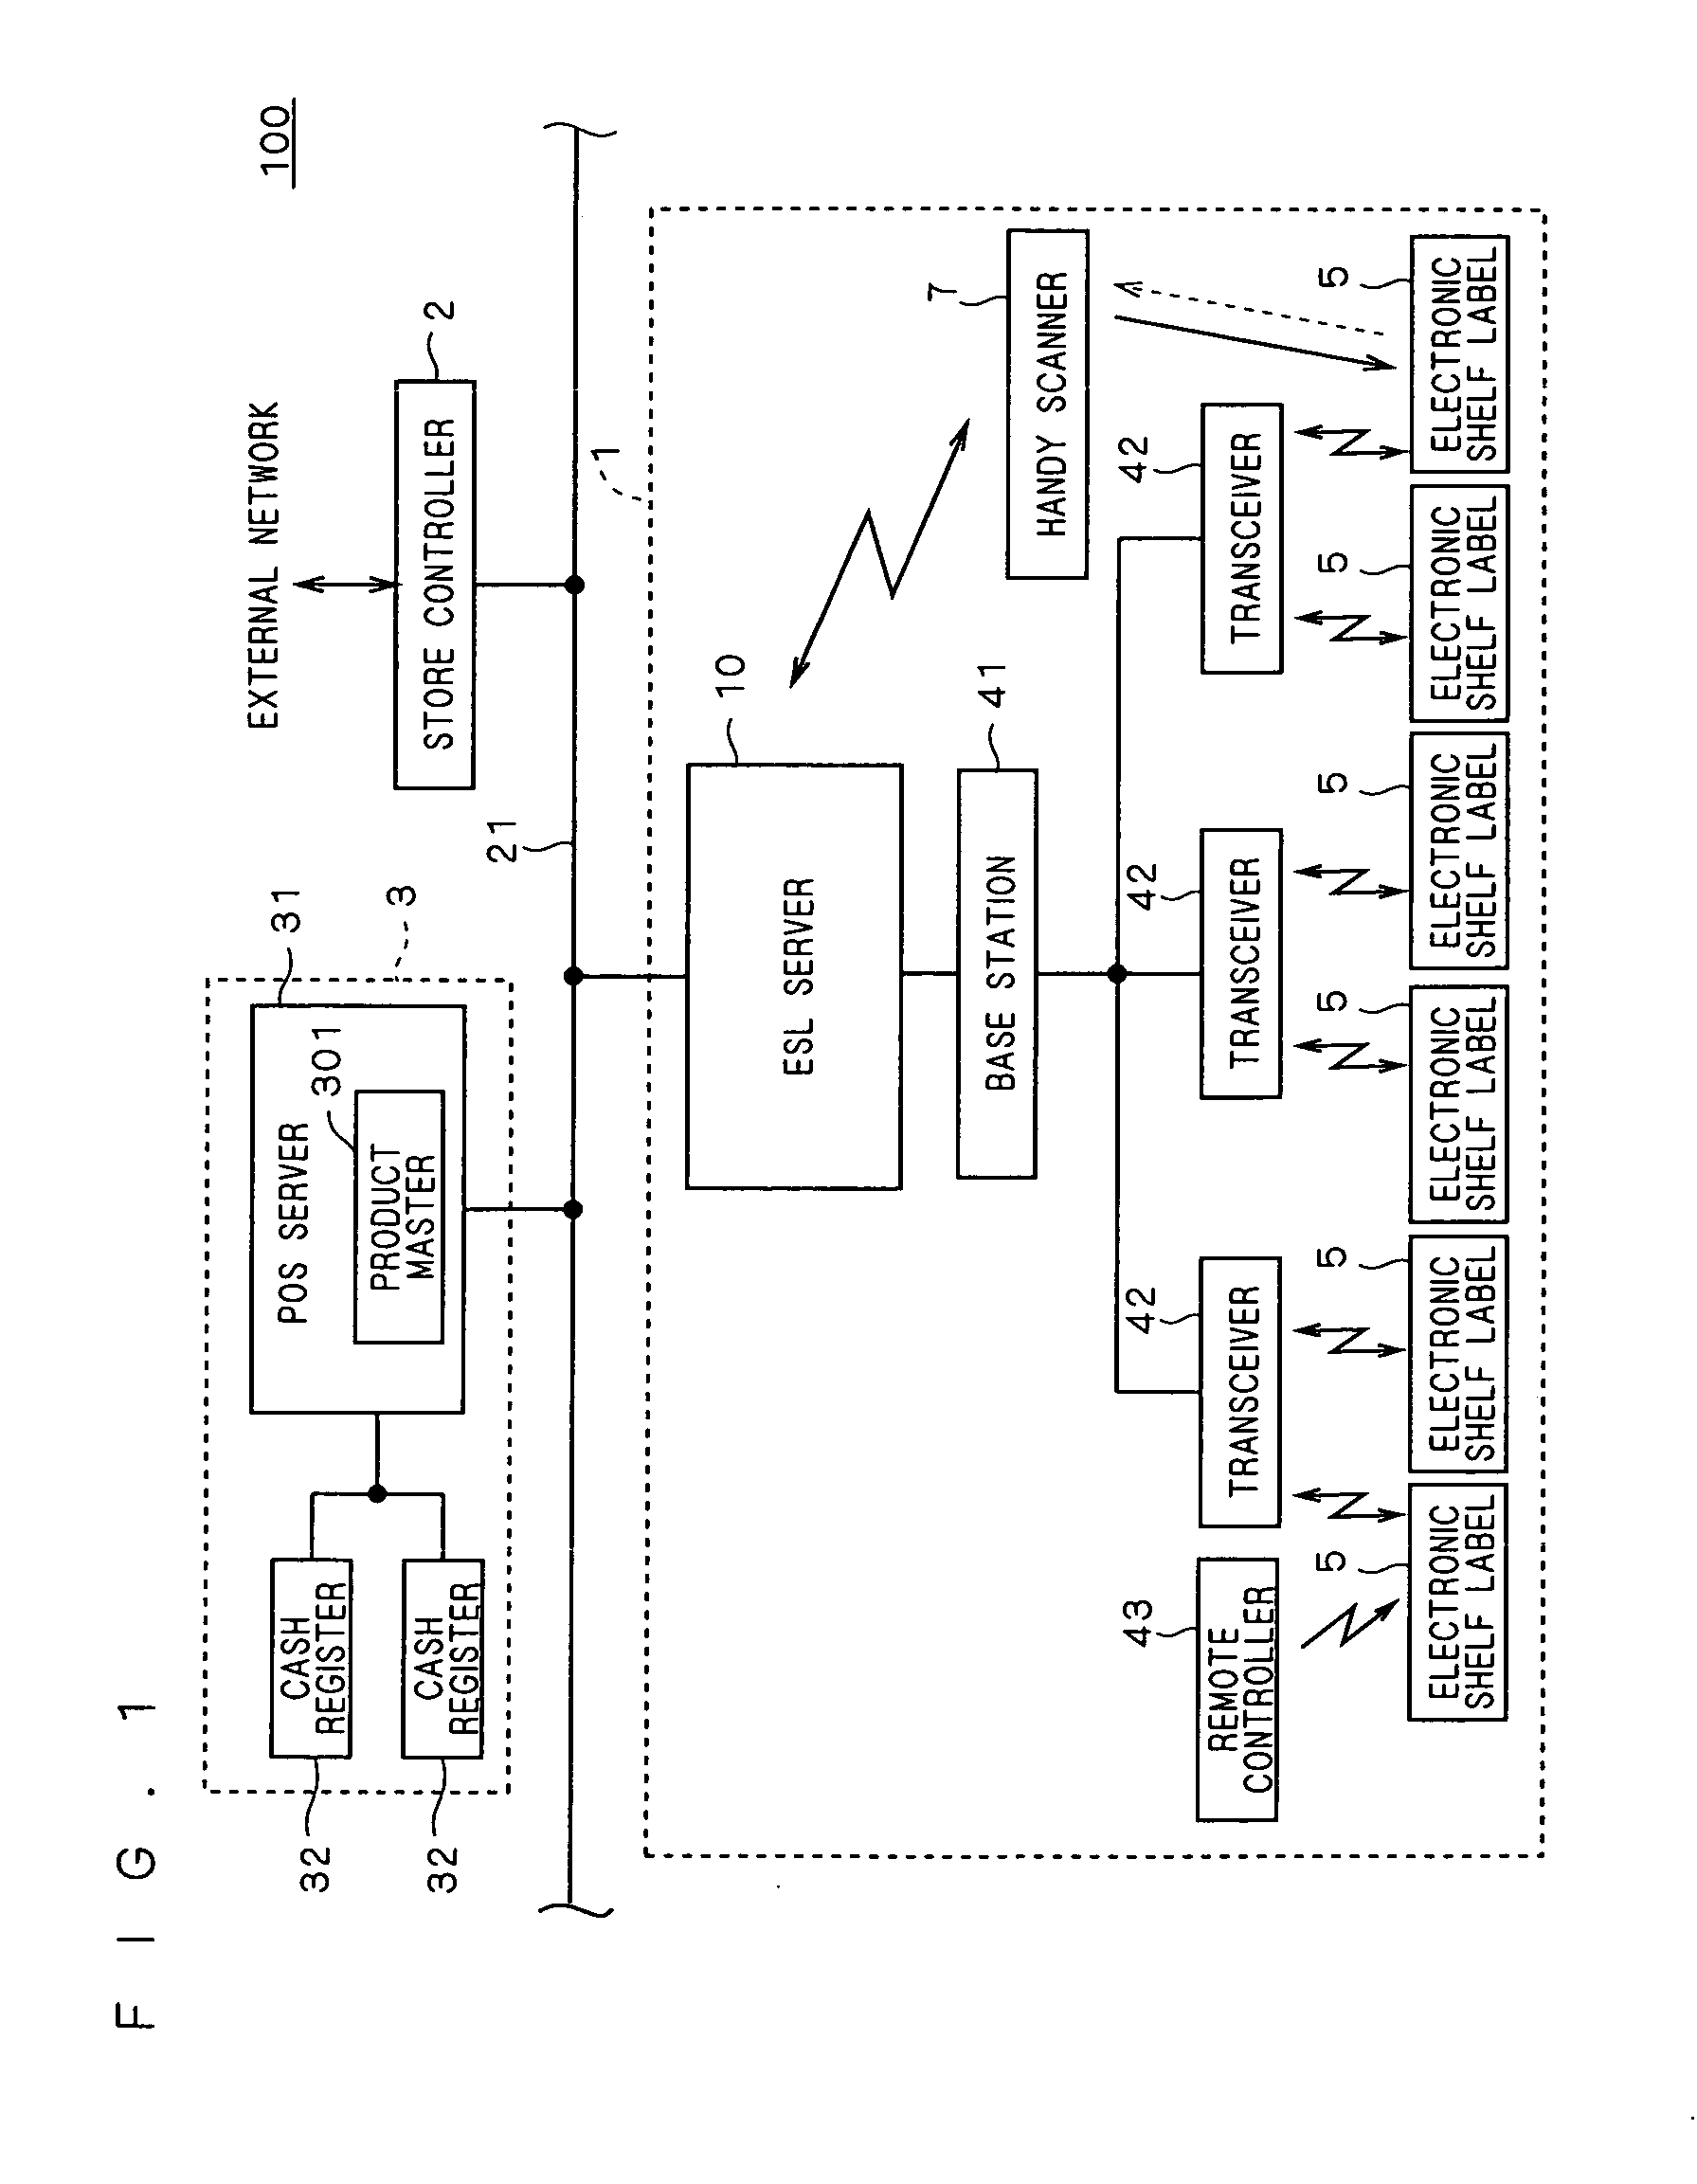 Electronic shelf label system and display method